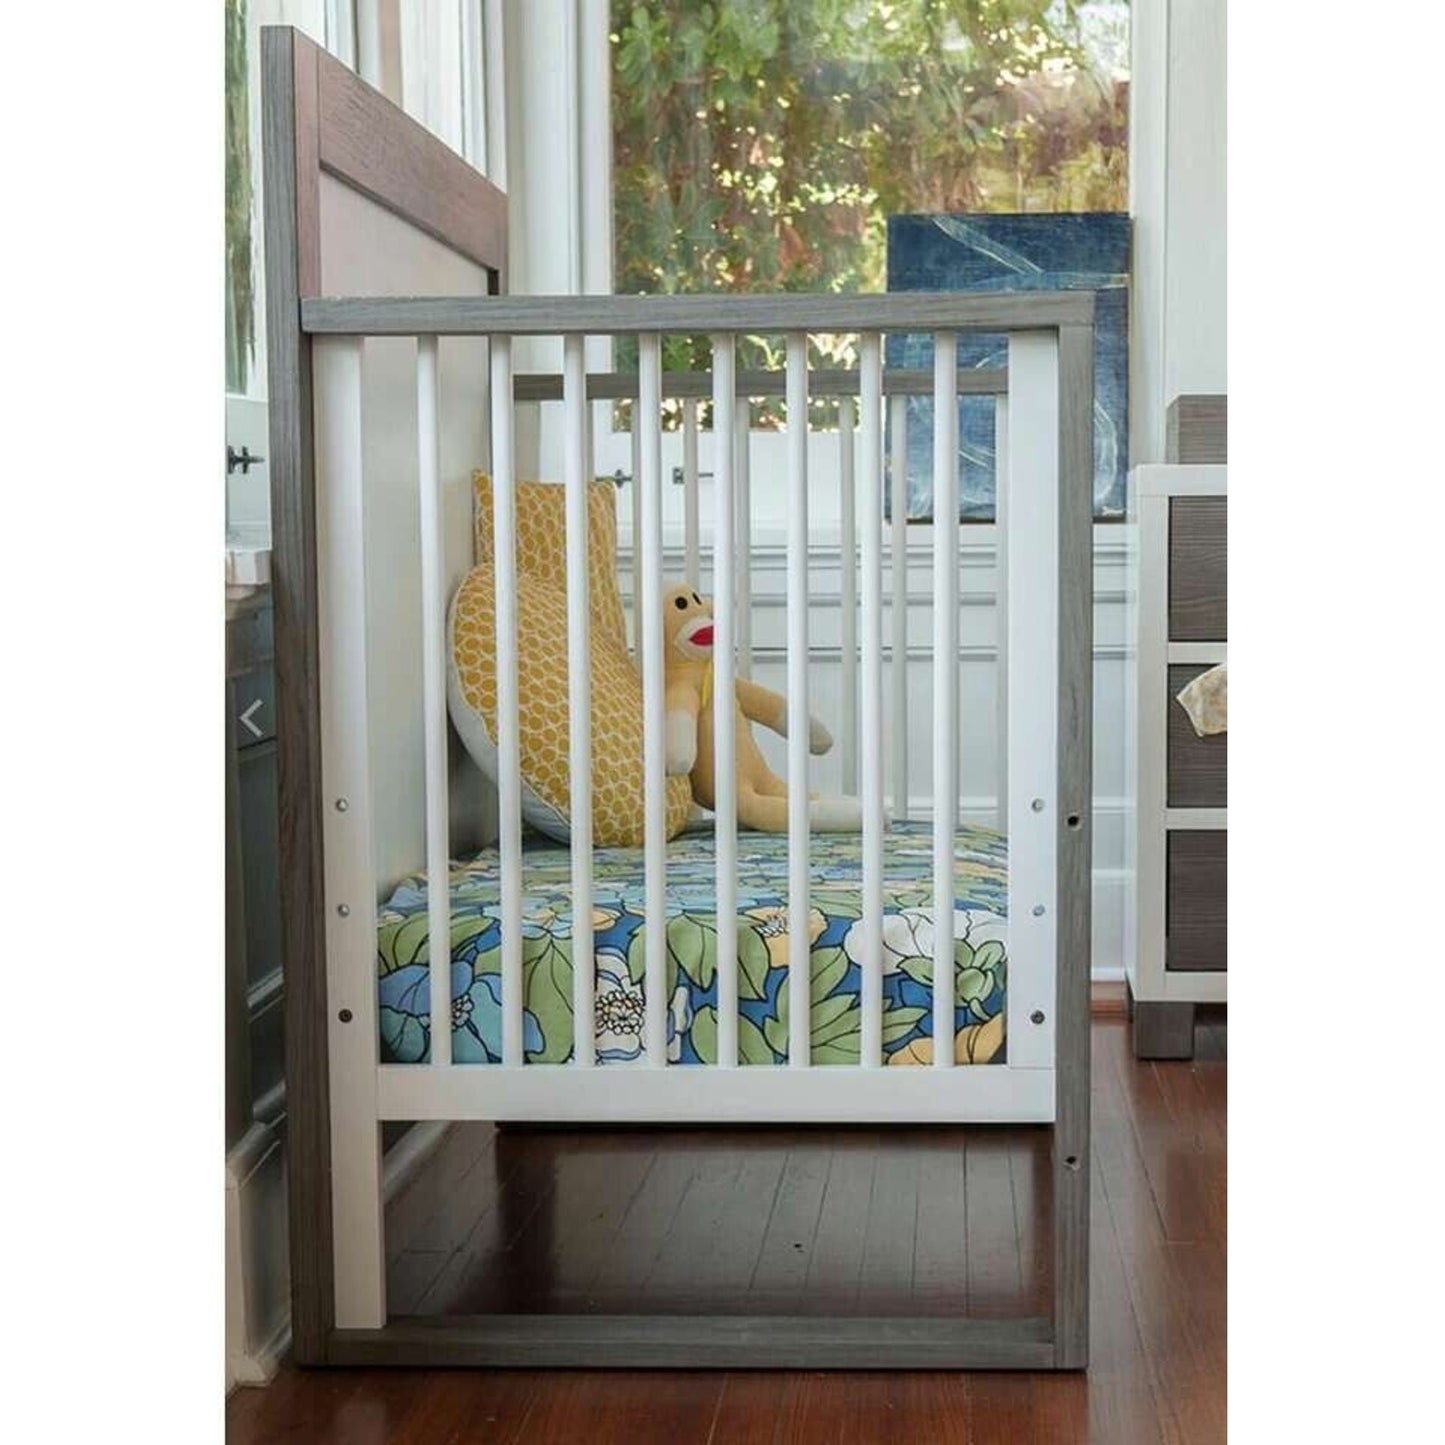 Lolly Me Milk Street 4 in 1 Convertible Crib -Manufactured in 2019